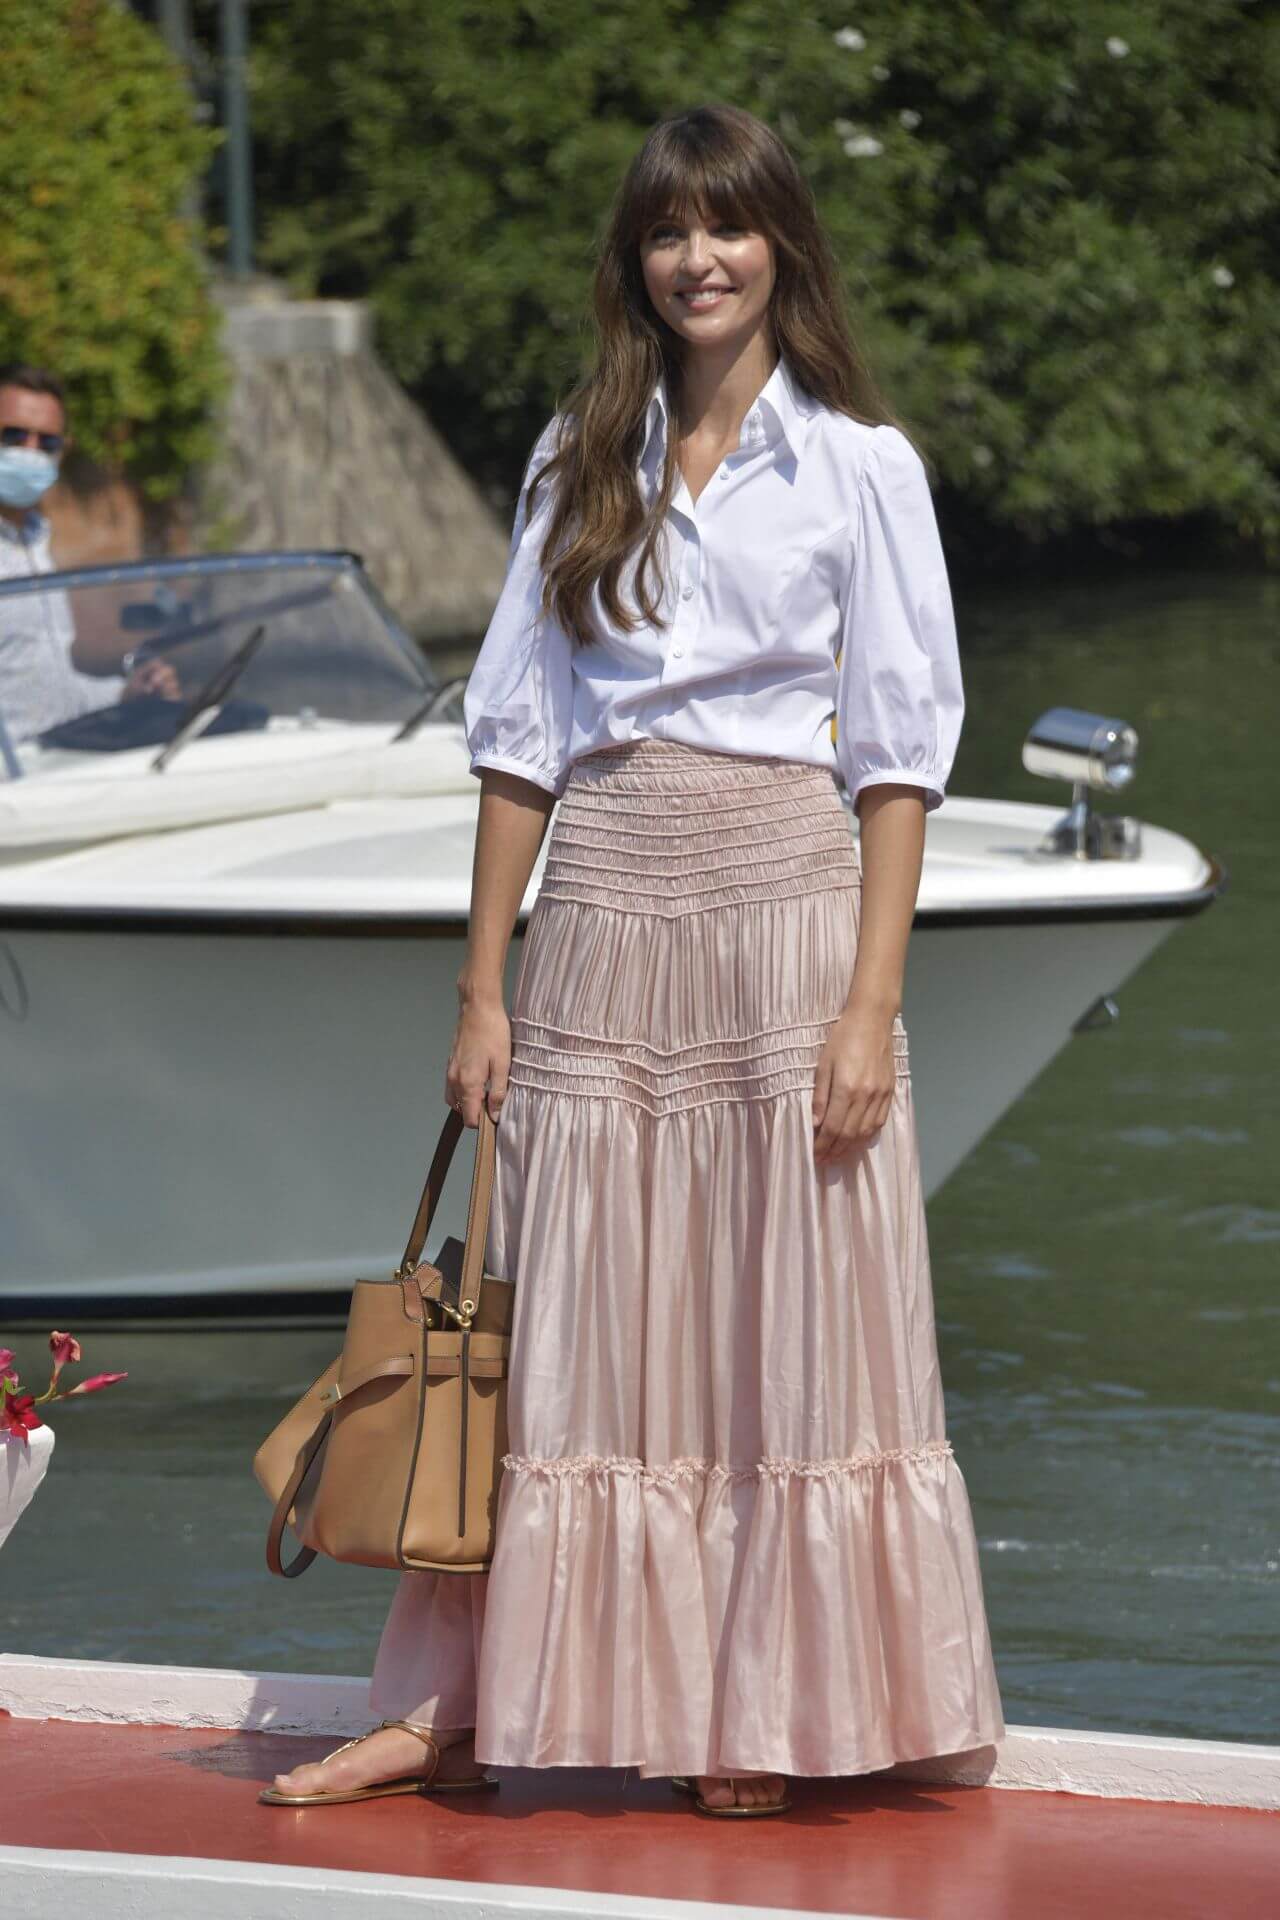 Annabelle Belmondo In White Collar Baggy Sleeves Shirt With Pleated Long Skirt Arriving at the Excelsior Hotel in Venice